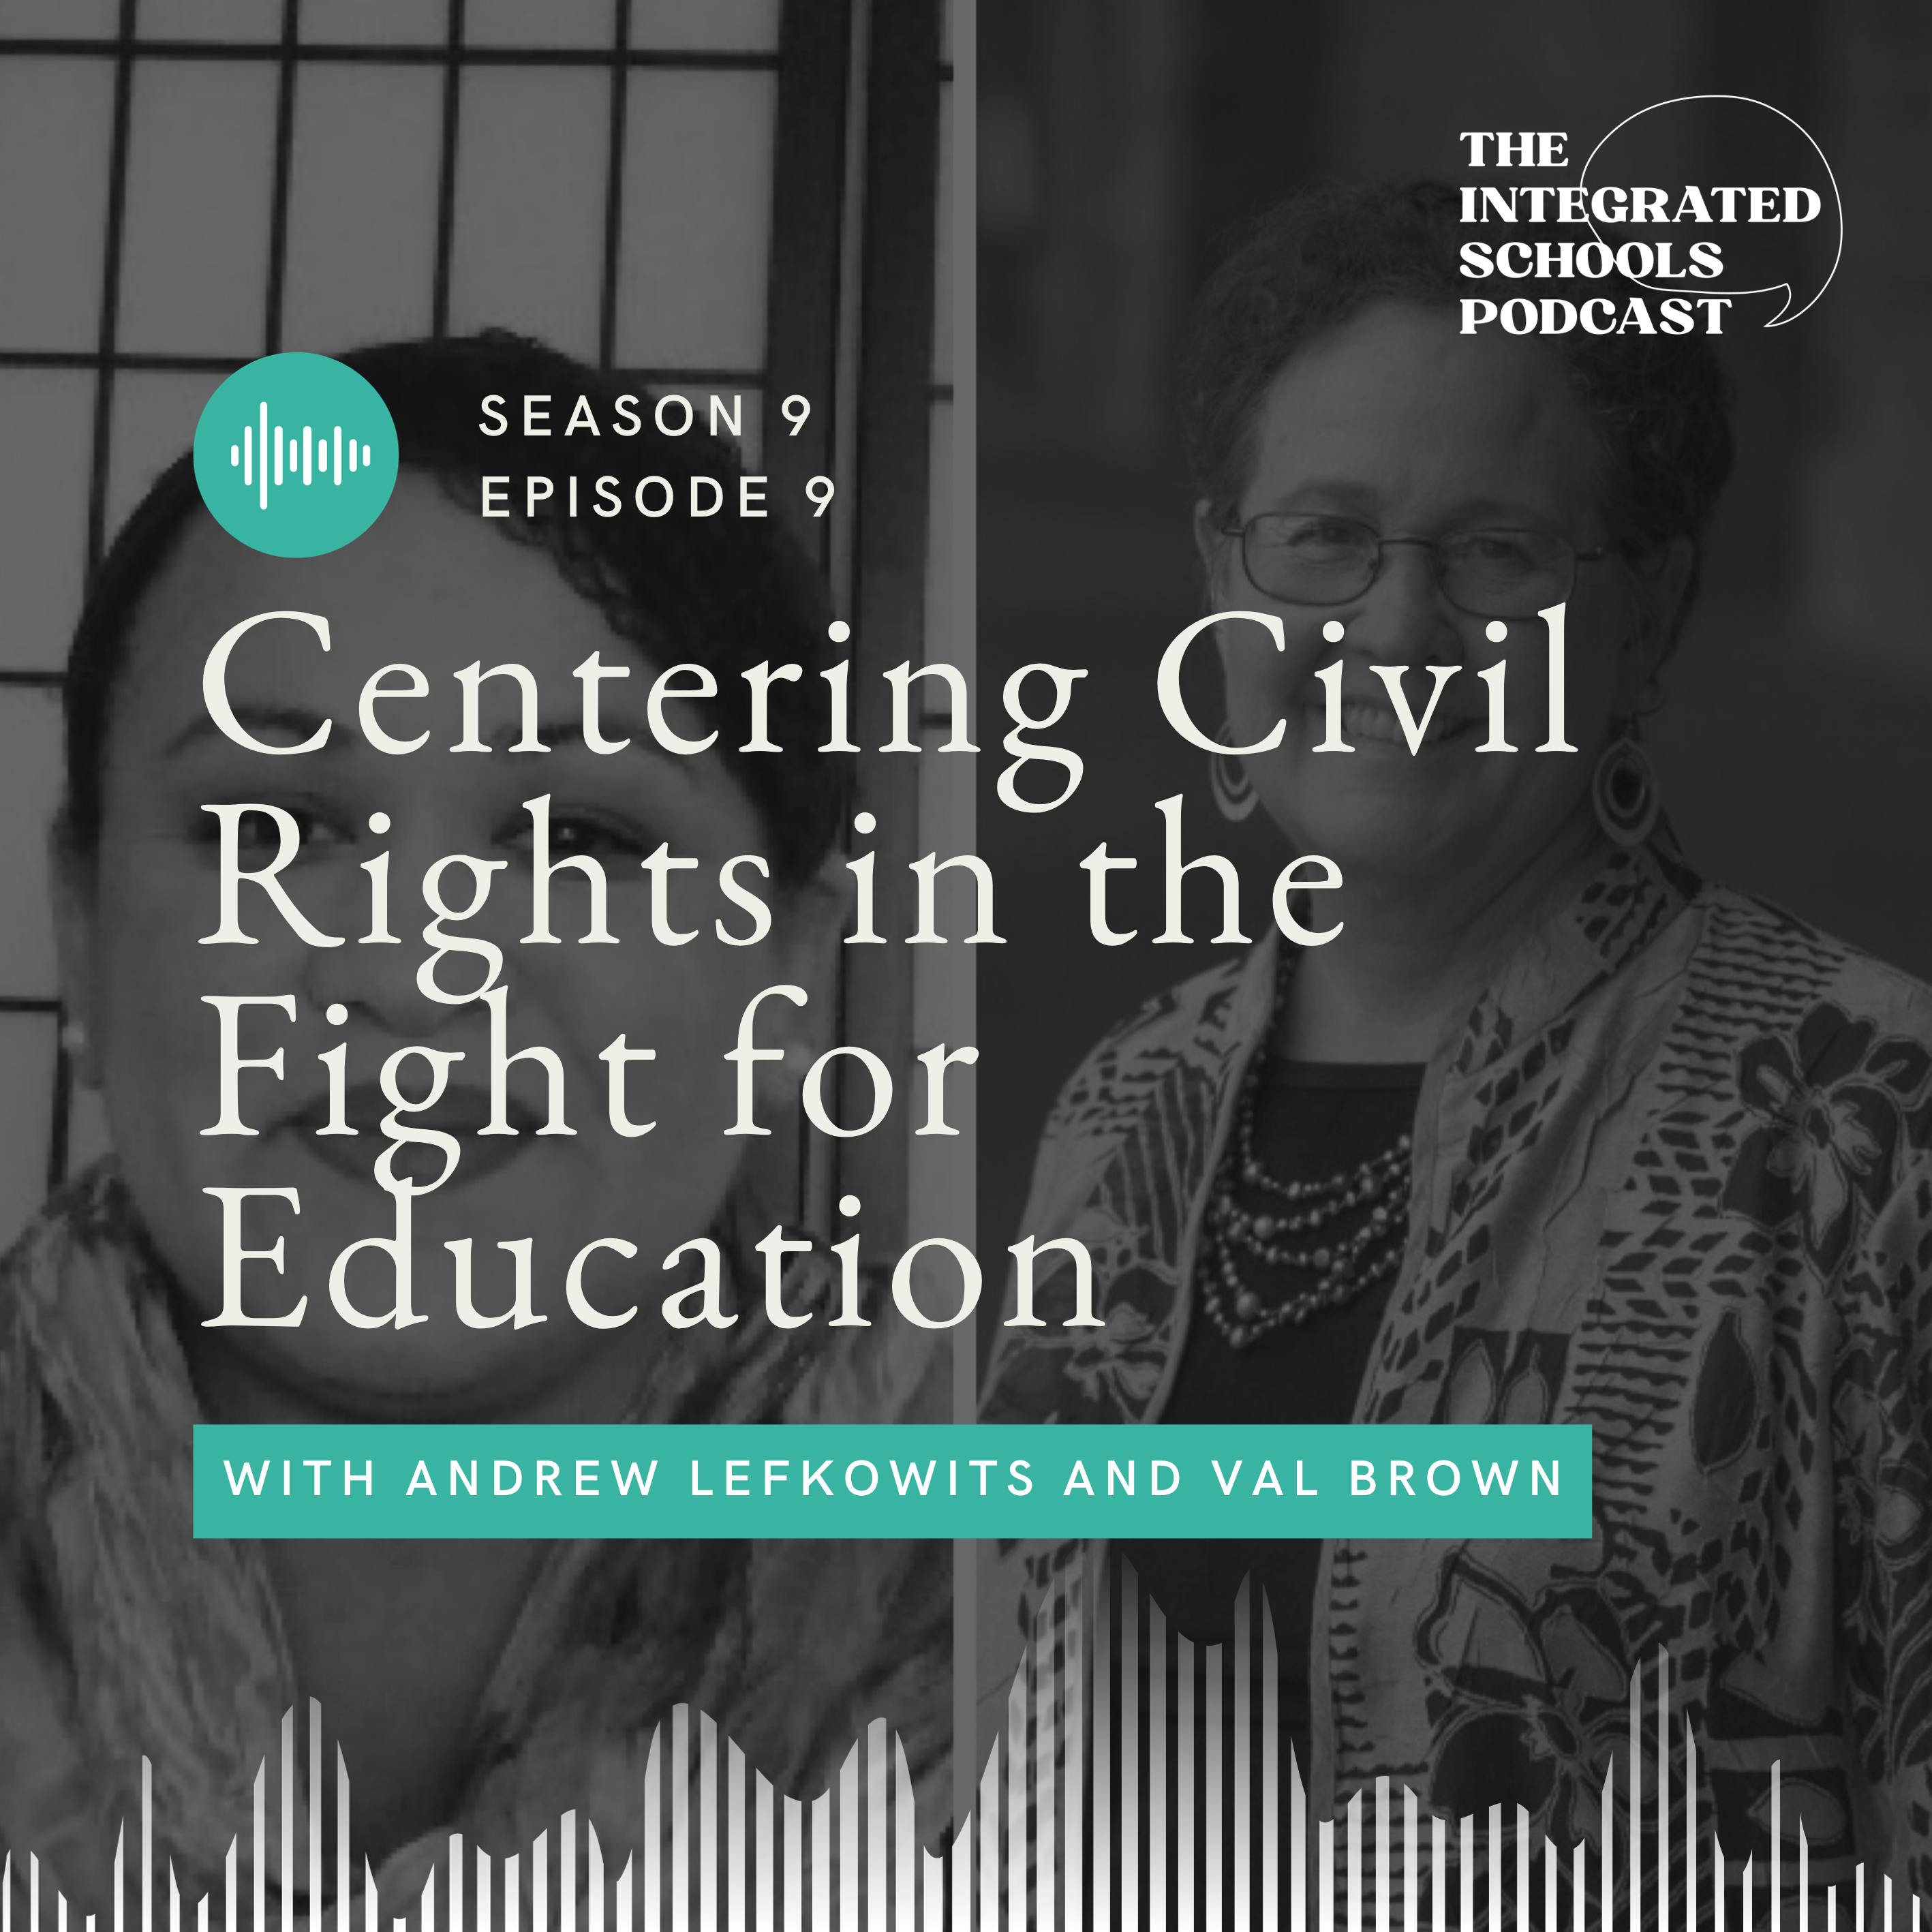 Centering Civil Rights in the Fight for Education